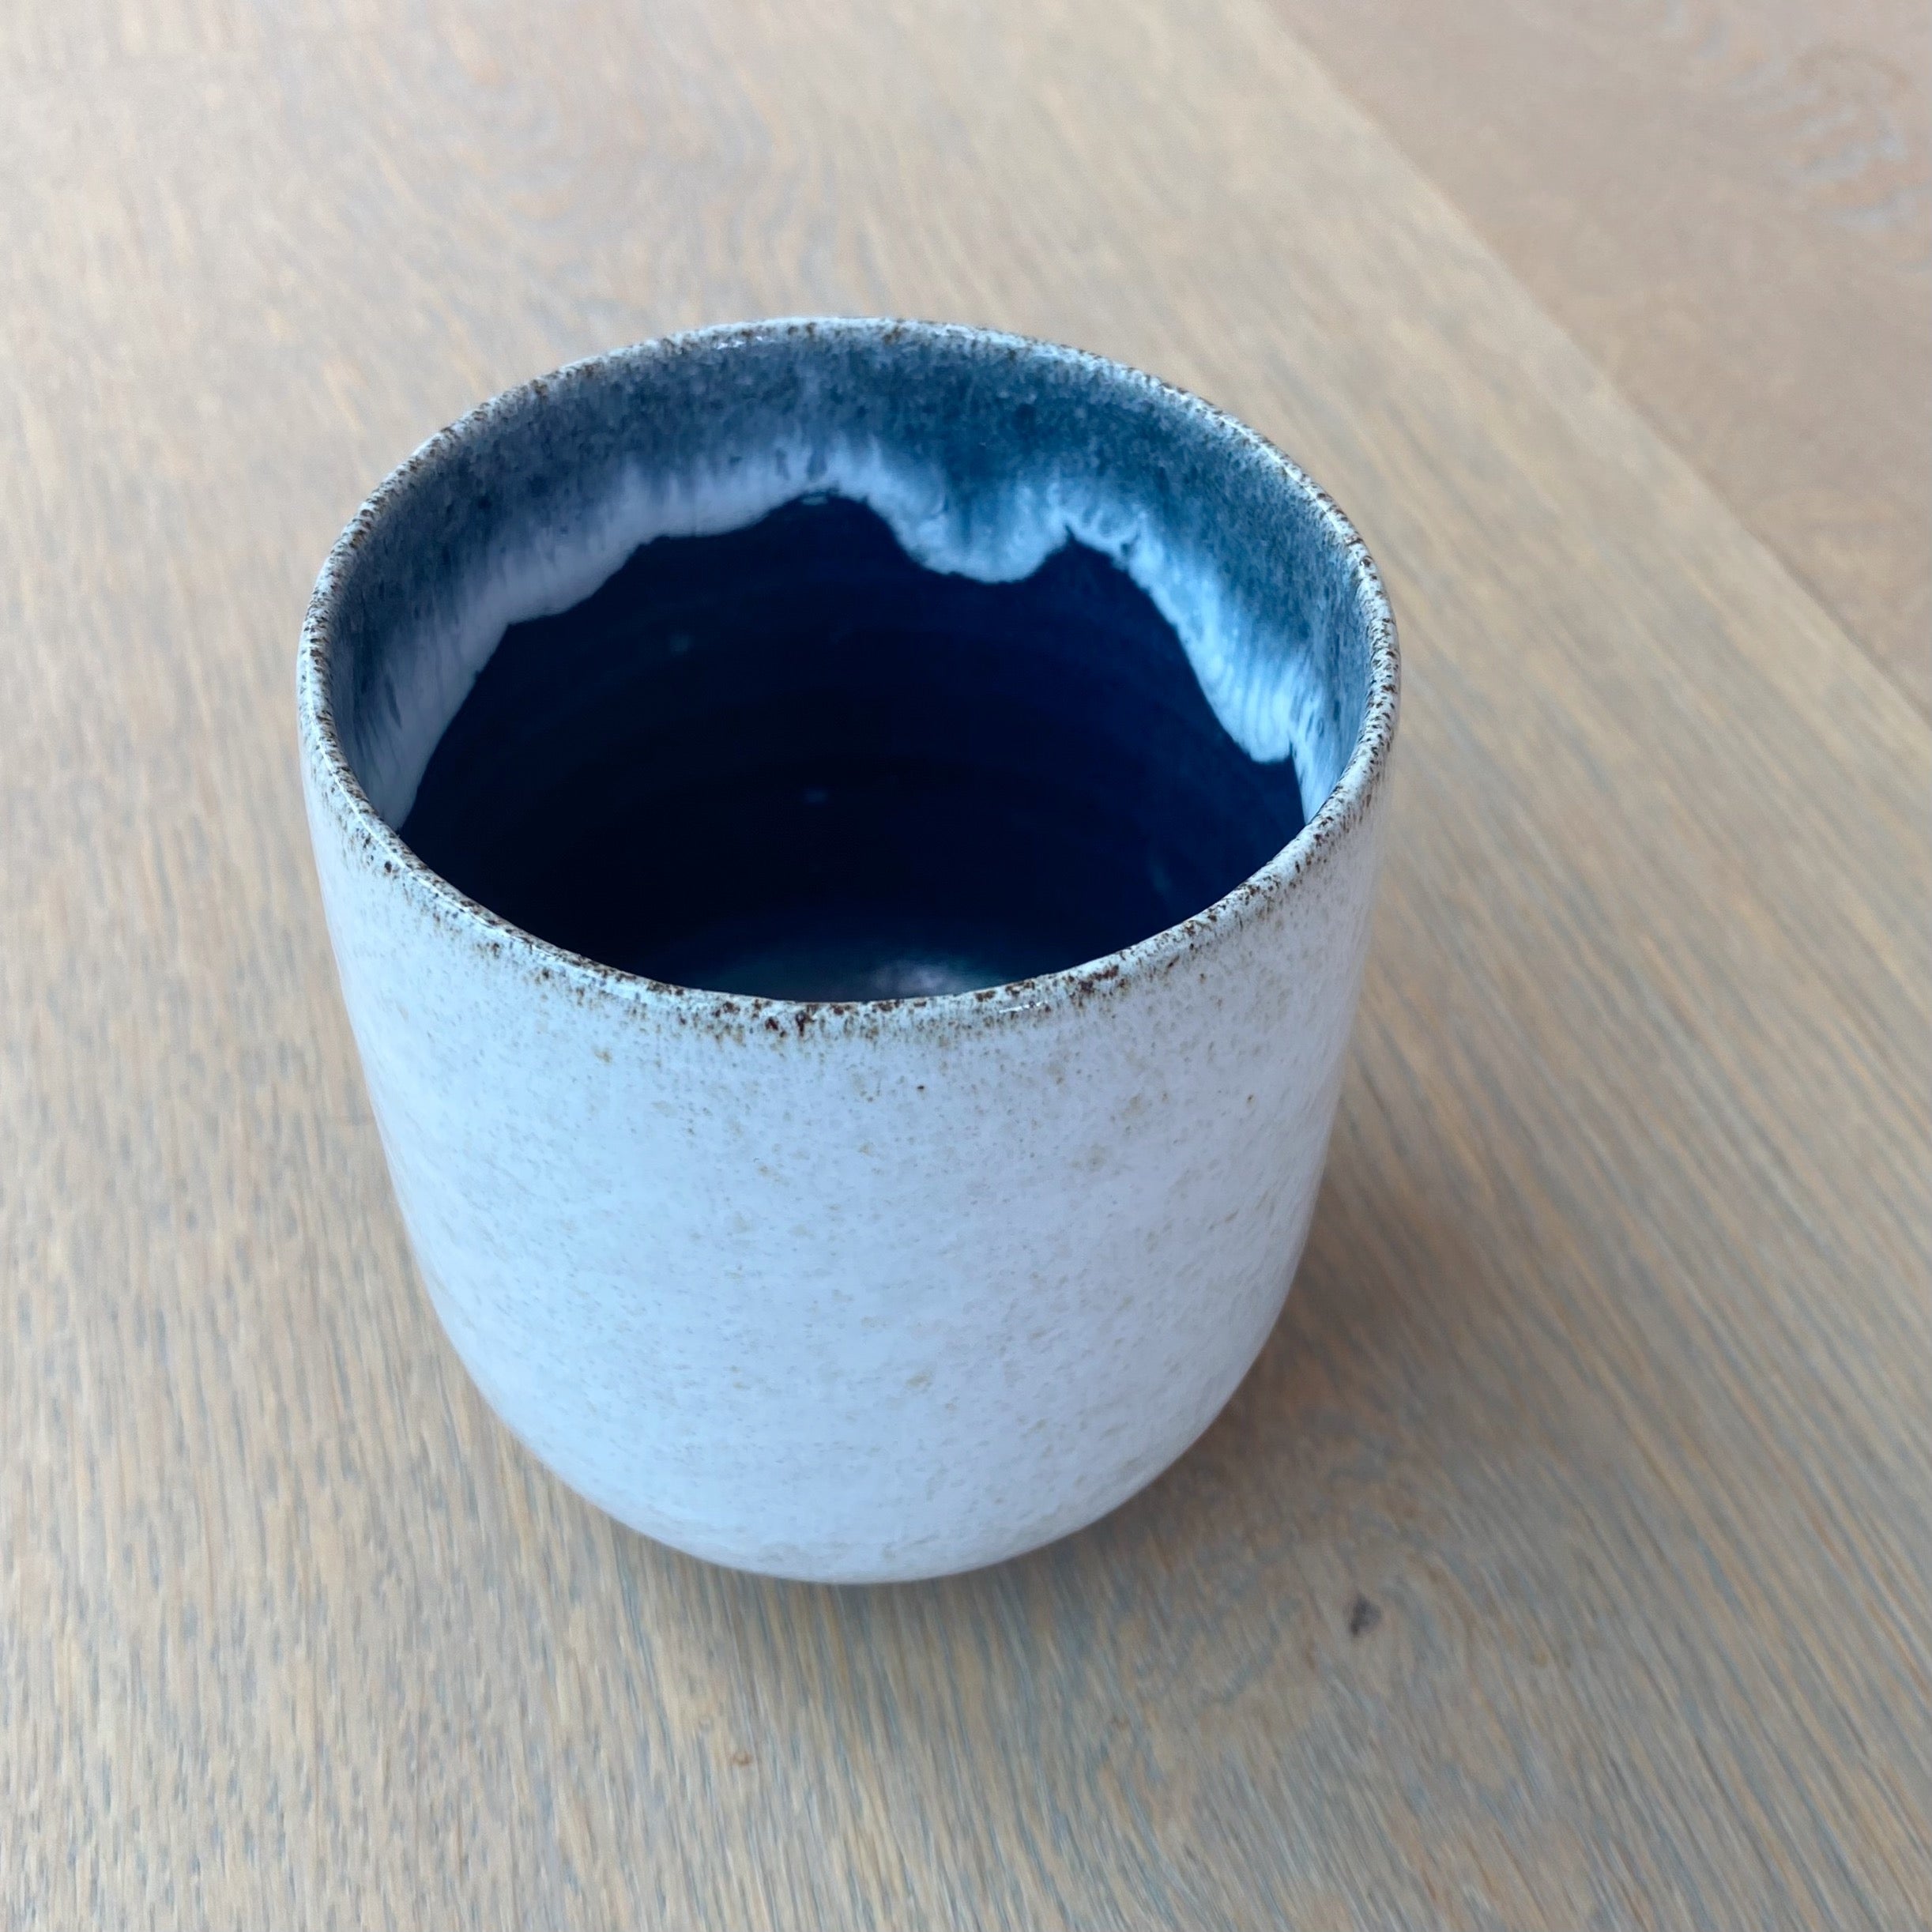 Tasja P coffee cup - off white and dark blue